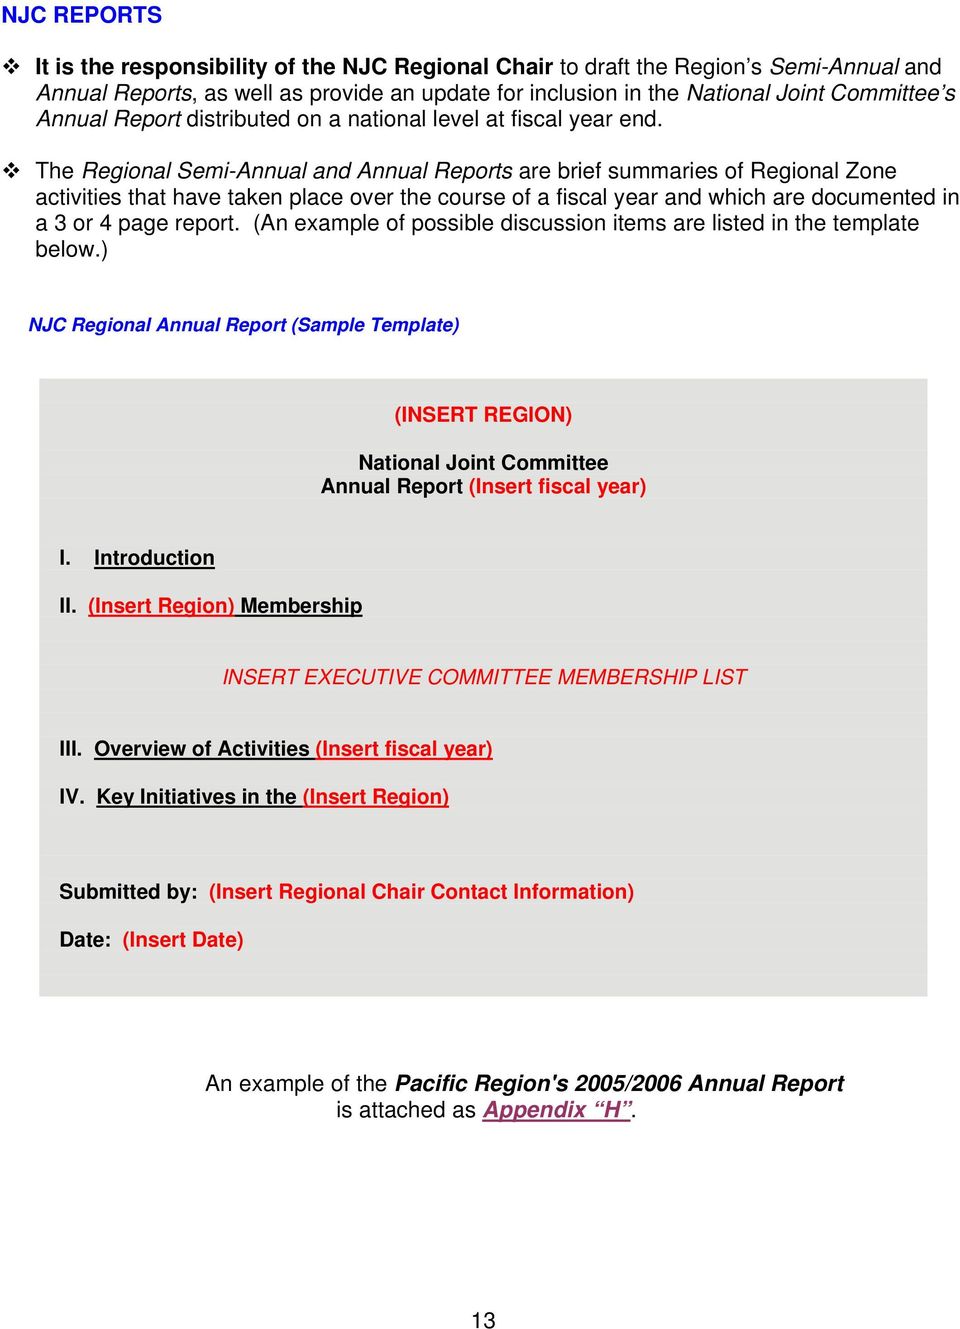 The Regional Semi-Annual and Annual Reports are brief summaries of Regional Zone activities that have taken place over the course of a fiscal year and which are documented in a 3 or 4 page report.